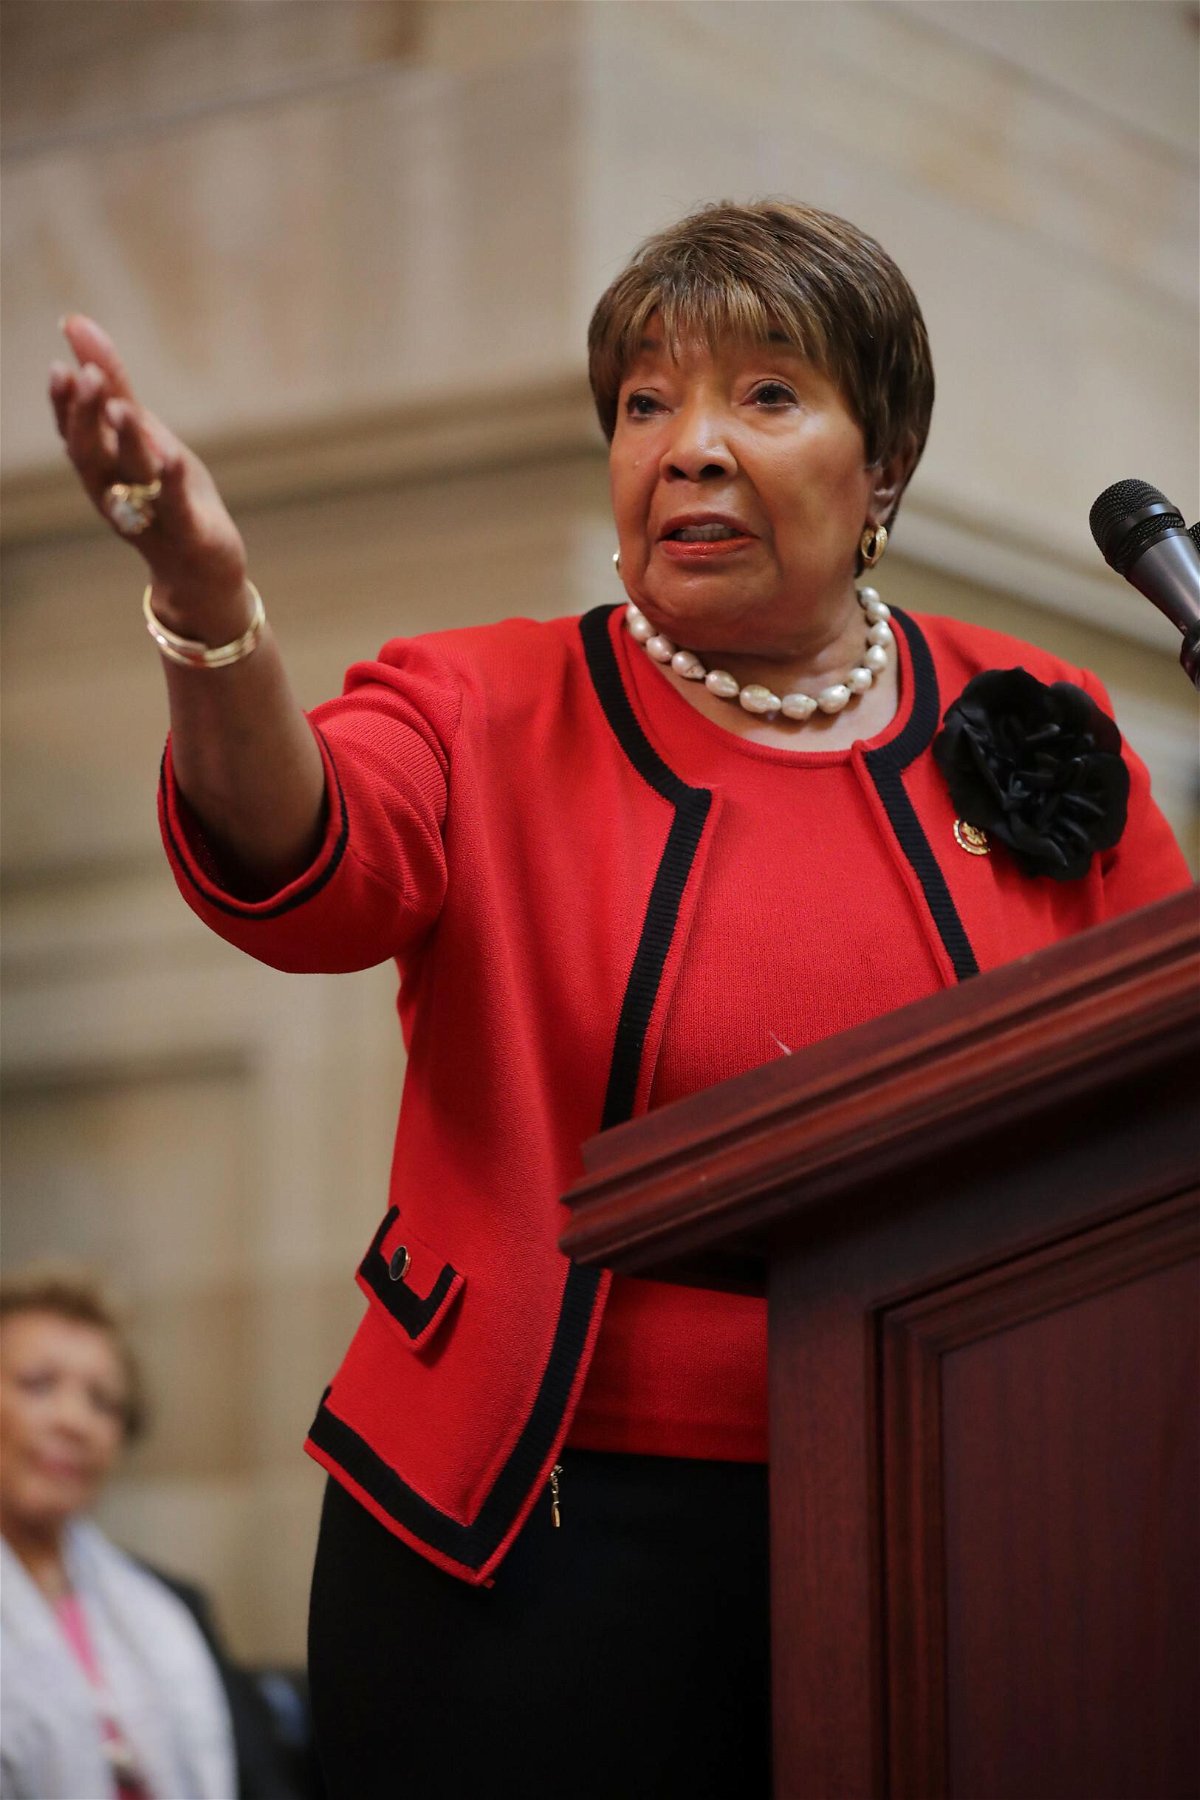 <i>Chip Somodevilla/Getty Images</i><br/>Rep. Eddie Bernice Johnson (D-TX) delivers remarks during an event honoring NASA's 